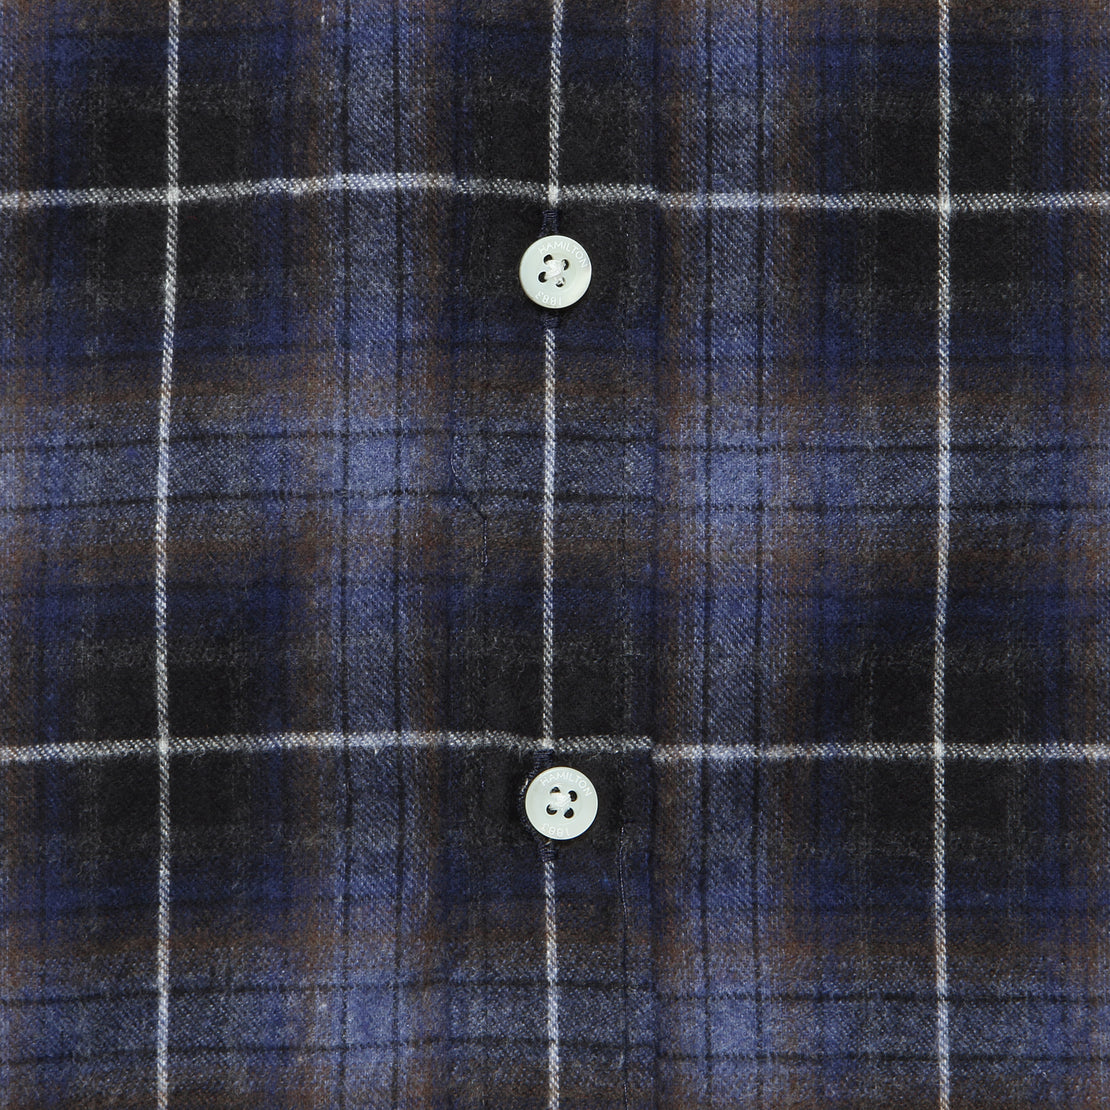 Check Twill Flannel Shirt -  Navy/Brown/White - Hamilton Shirt Co. - STAG Provisions - Tops - L/S Woven - Plaid